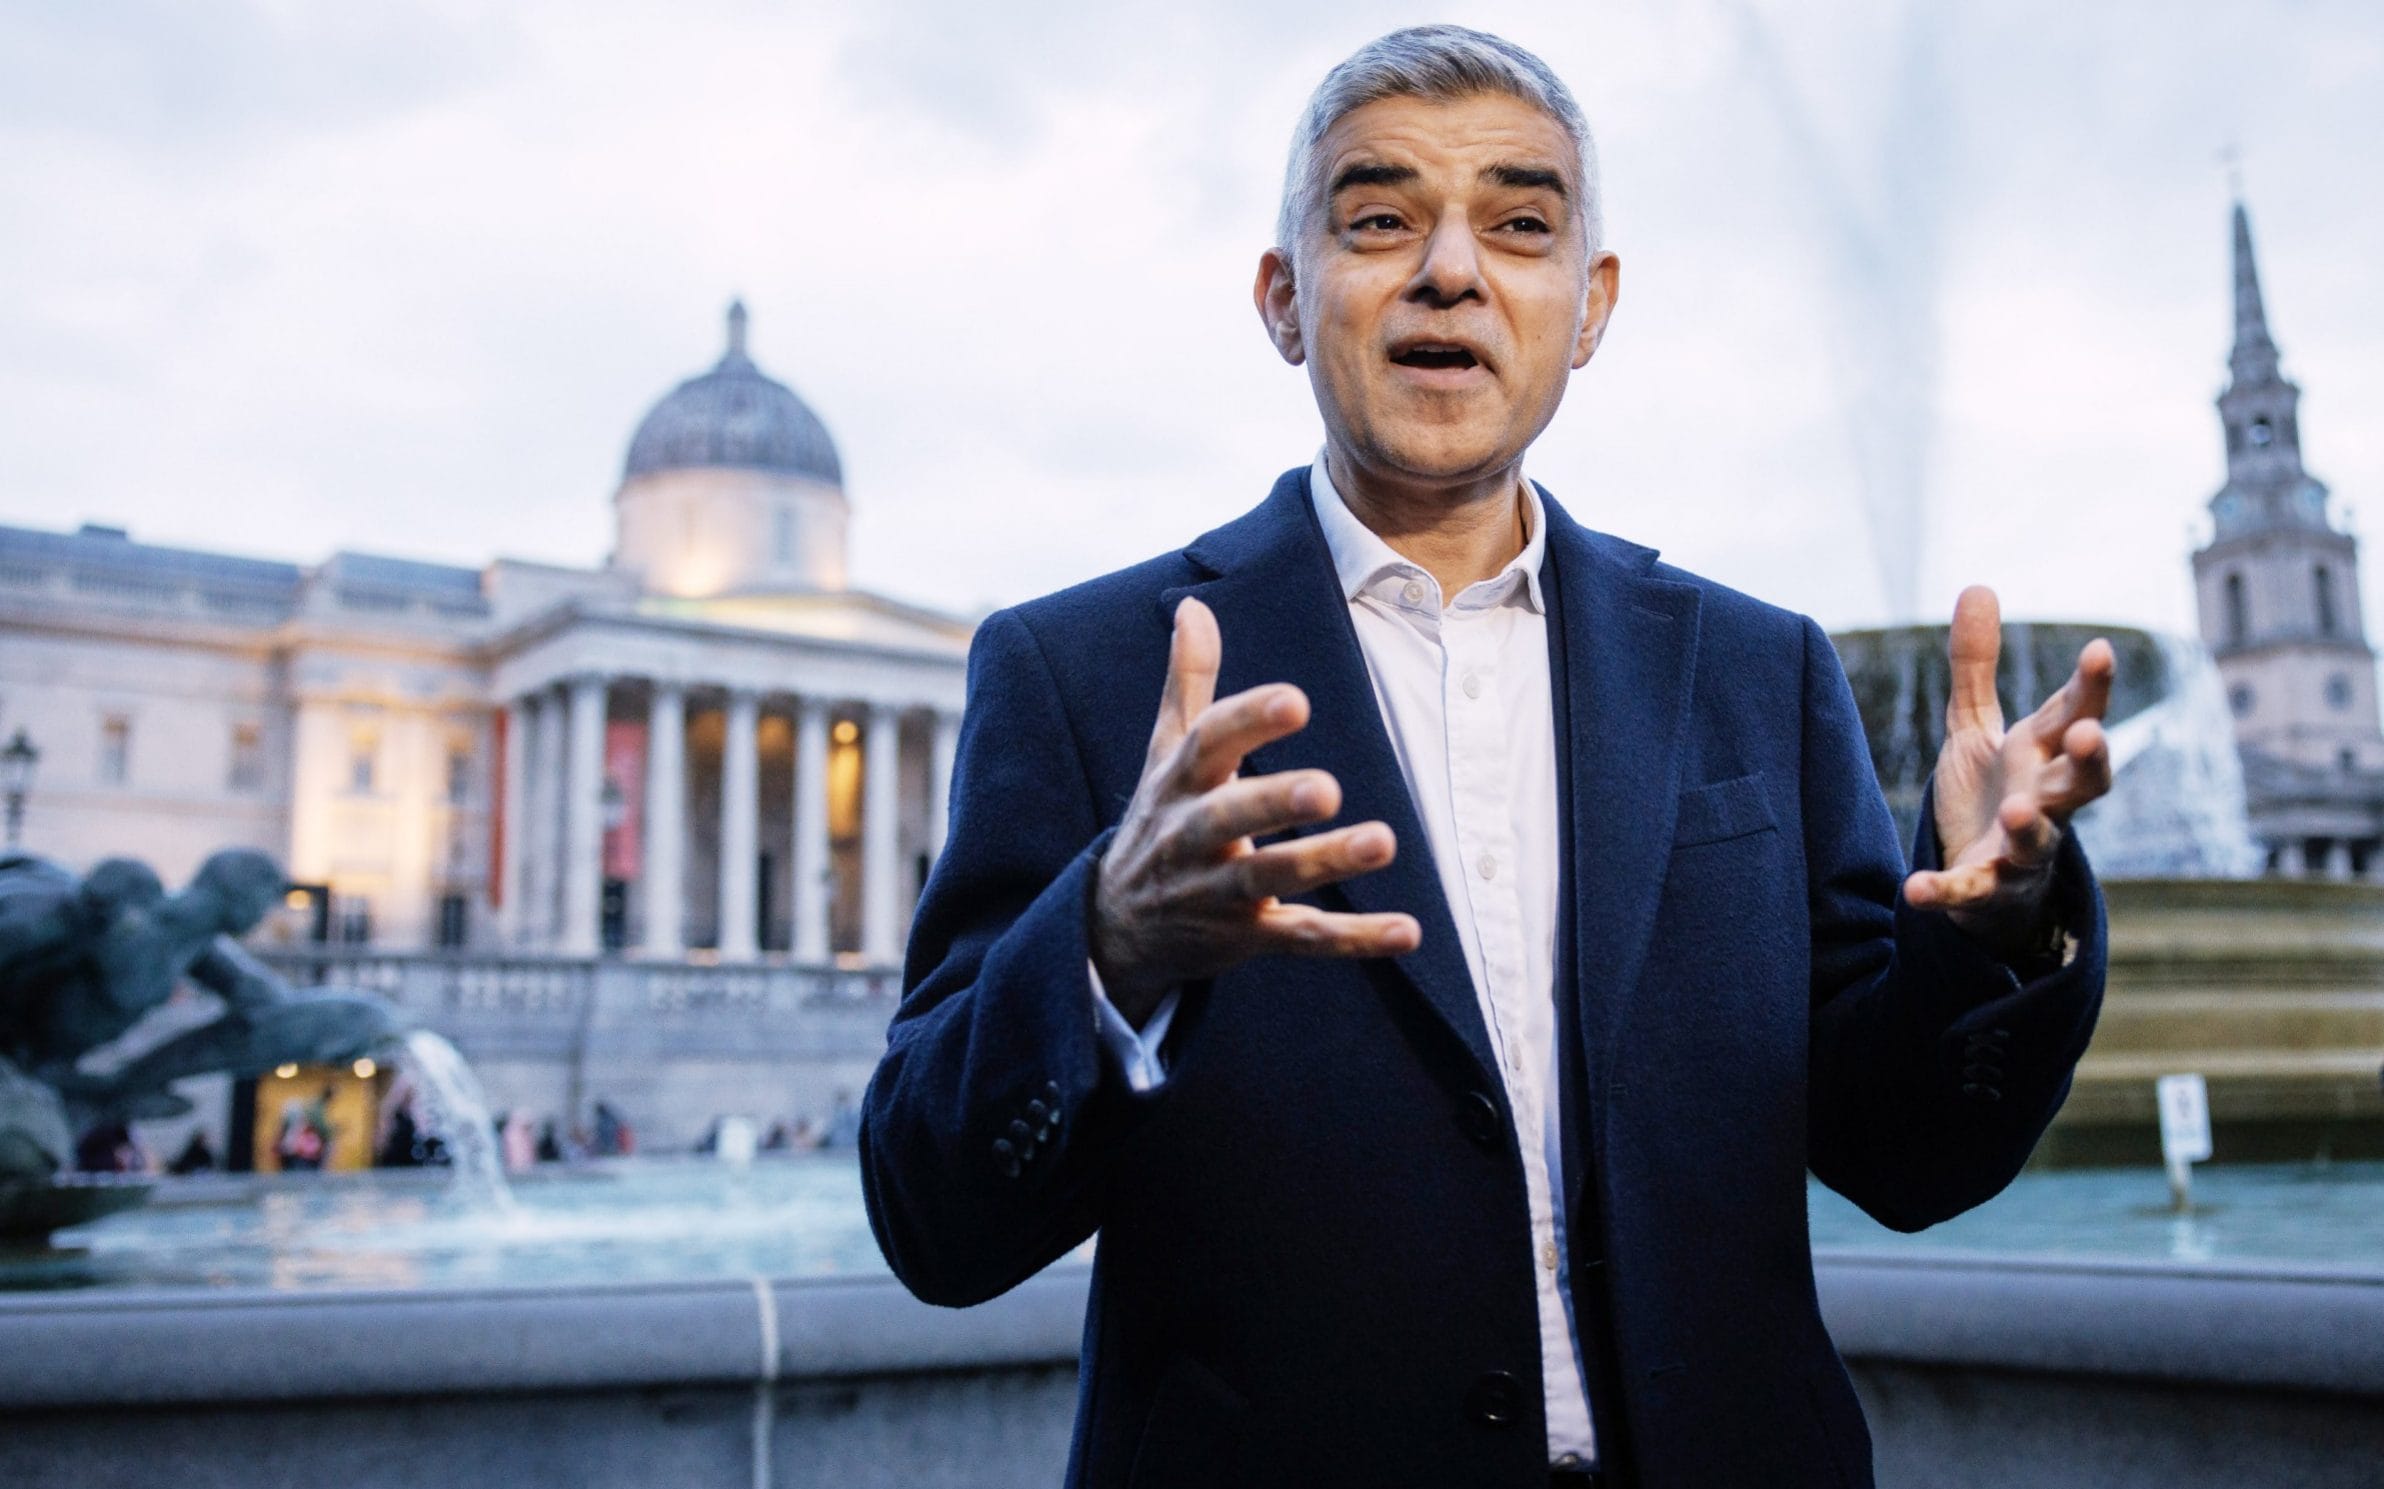 fears sadiq khan will bring in pay-per-mile road taxes after spending £3m on project